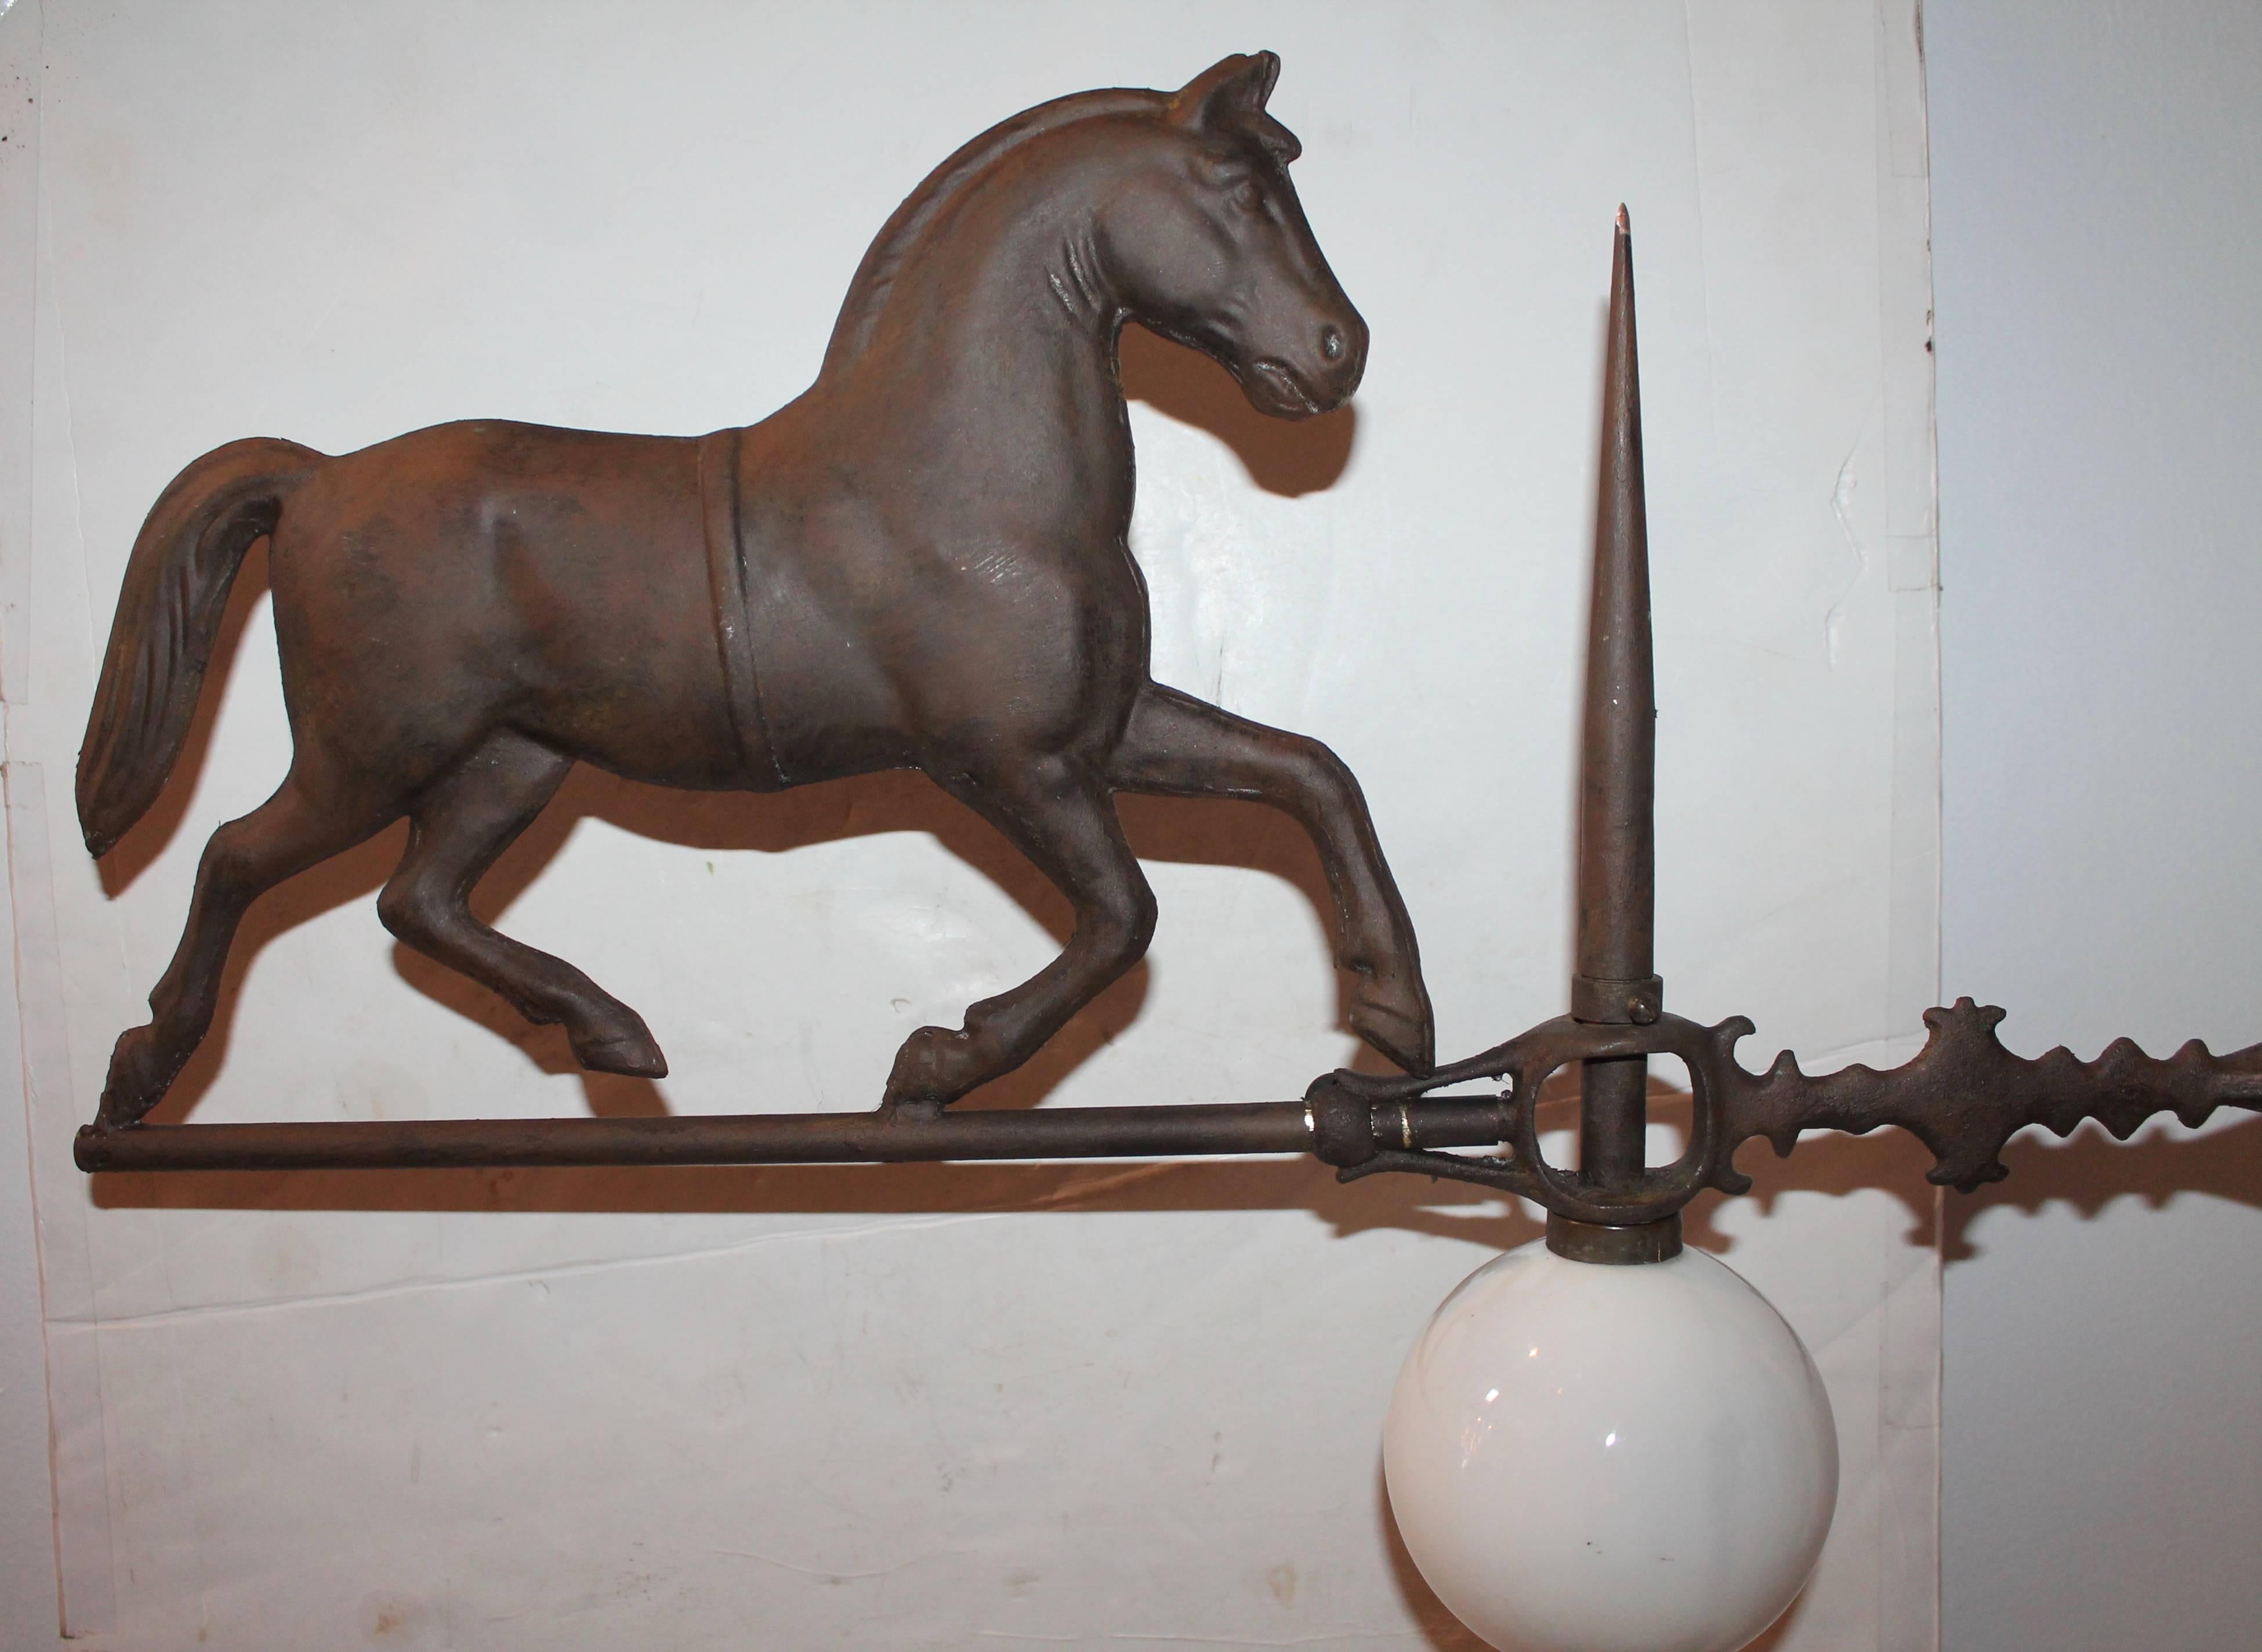 This Folk Art horse is painted copper and iron Directional is all original and has the iron and brass staff. The milk glass ball is original as well. The vane is on a custom-made cast iron stand. The condition is very good.